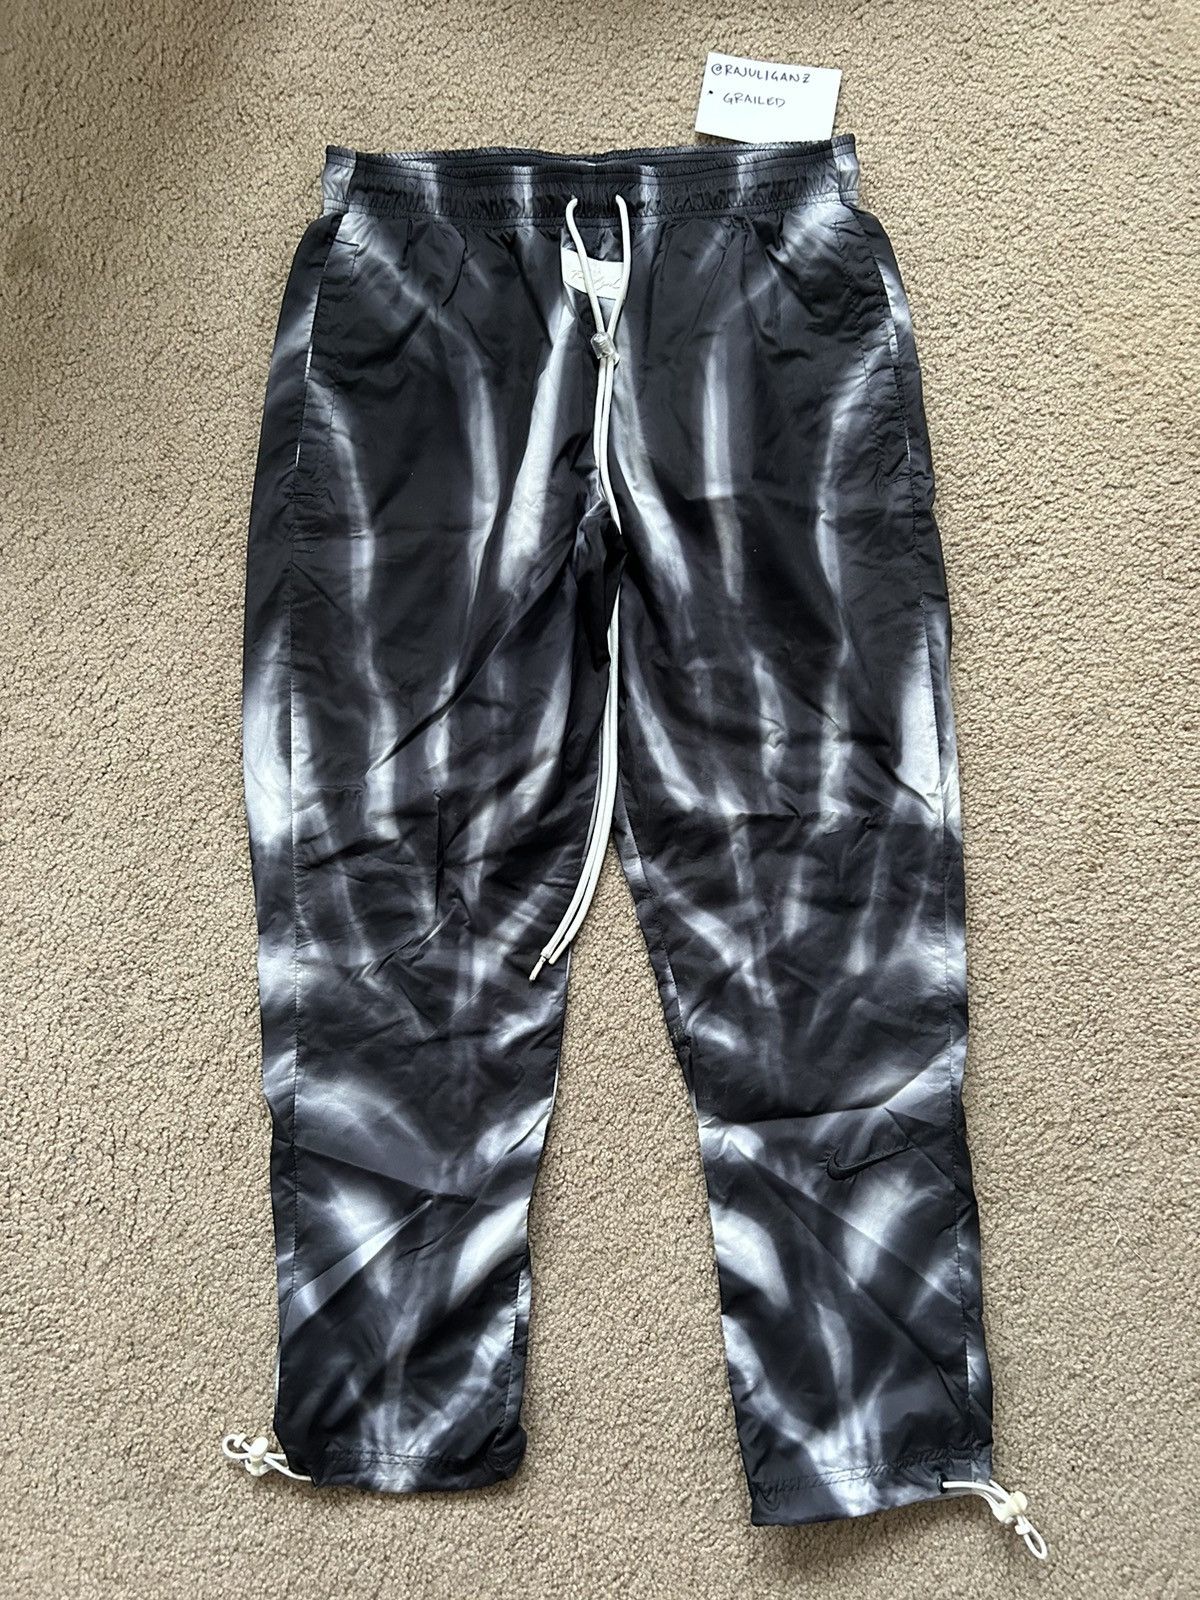 Fear Of God Nike All Over Print Pants | Grailed